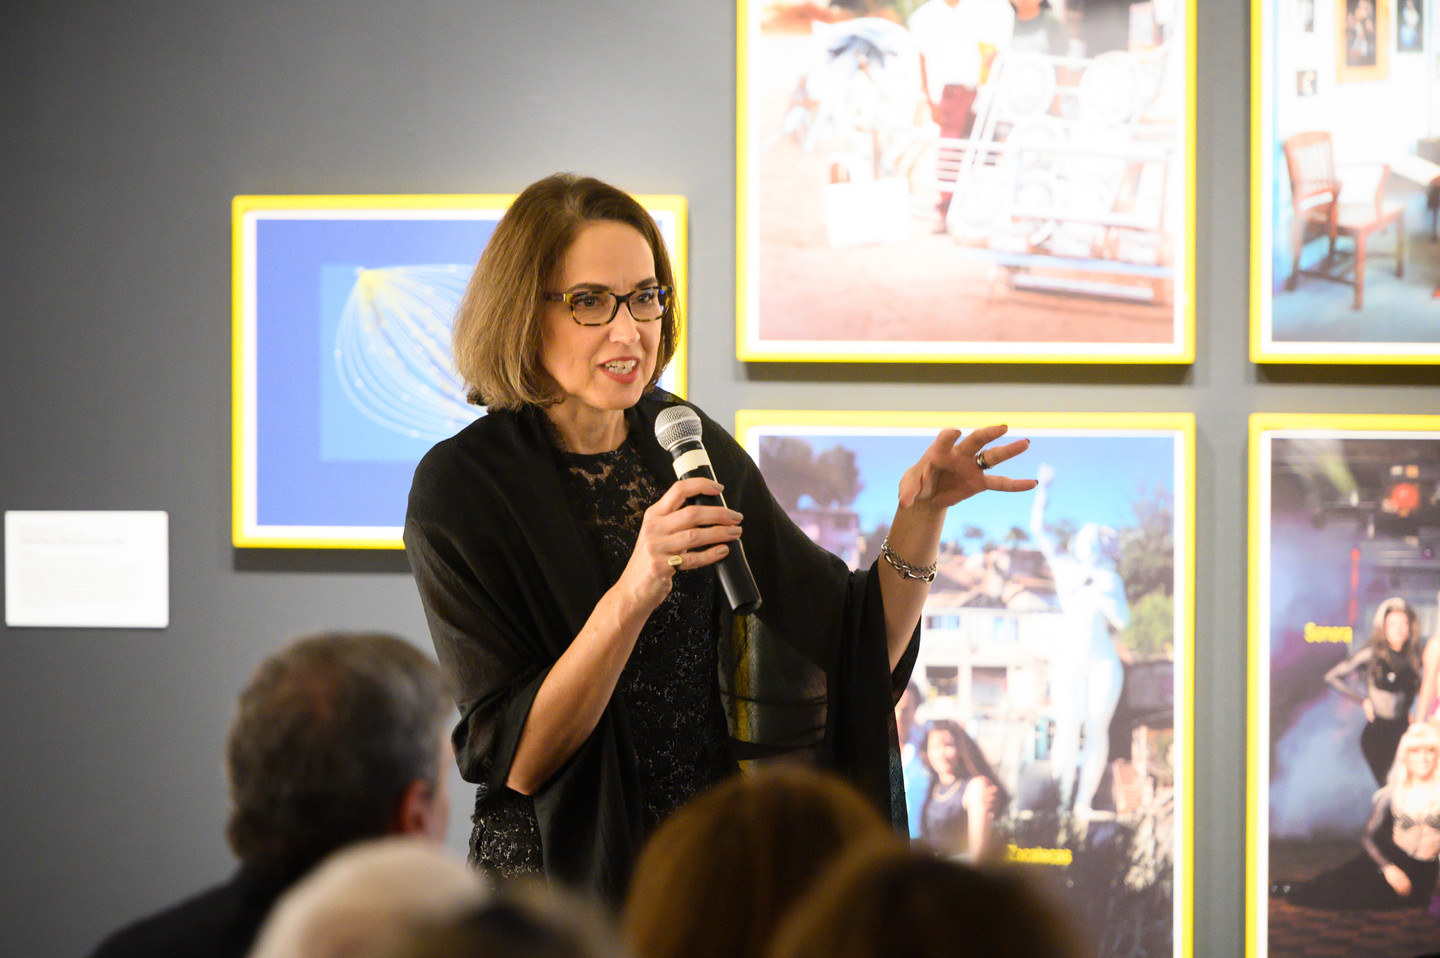 A woman with light skin and dark hair is speaking into a microphone in front of a wall with multiple photographs in bright yellow frames.